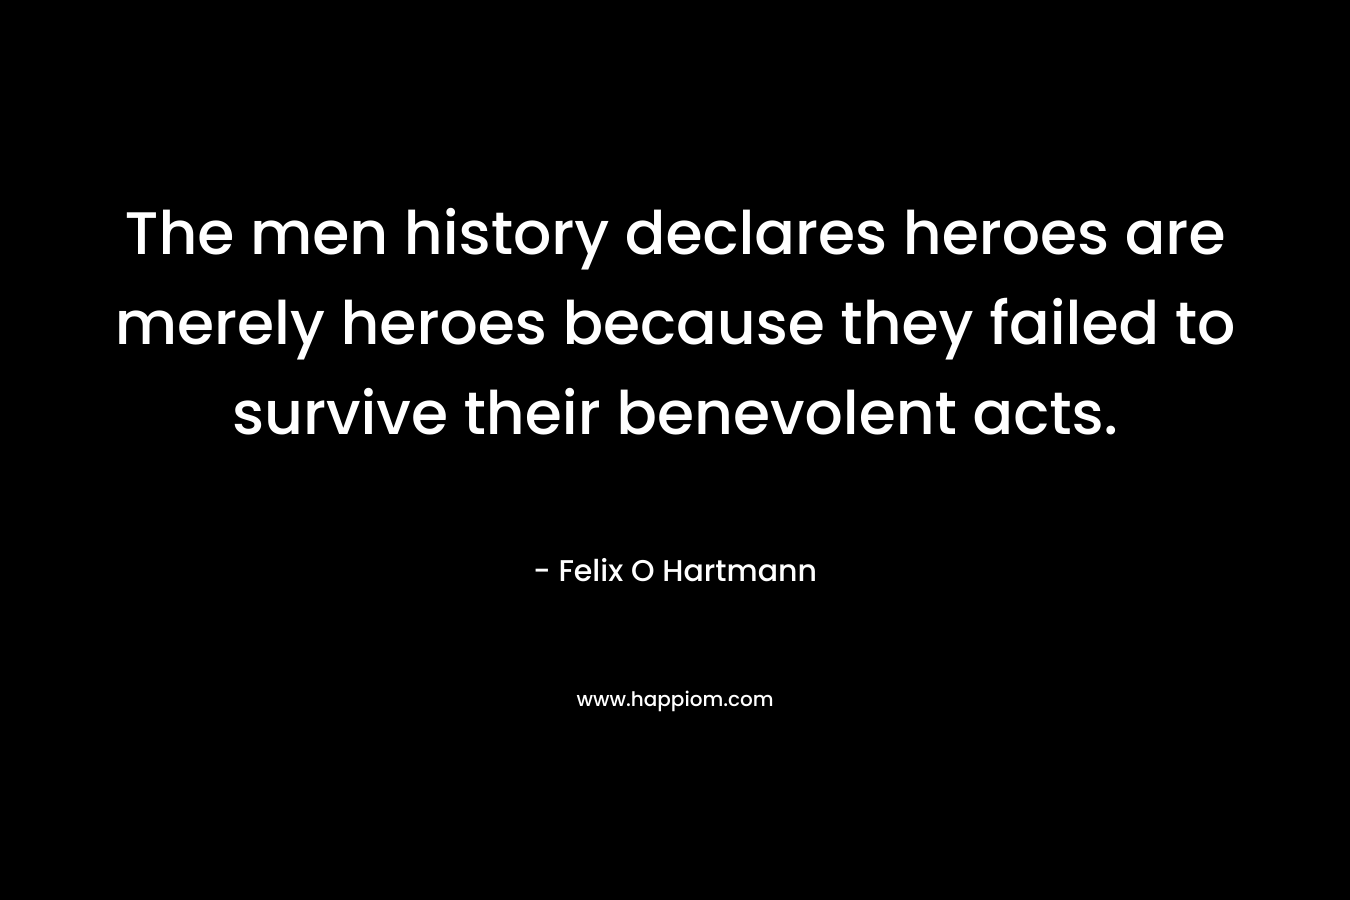 The men history declares heroes are merely heroes because they failed to survive their benevolent acts. – Felix O Hartmann